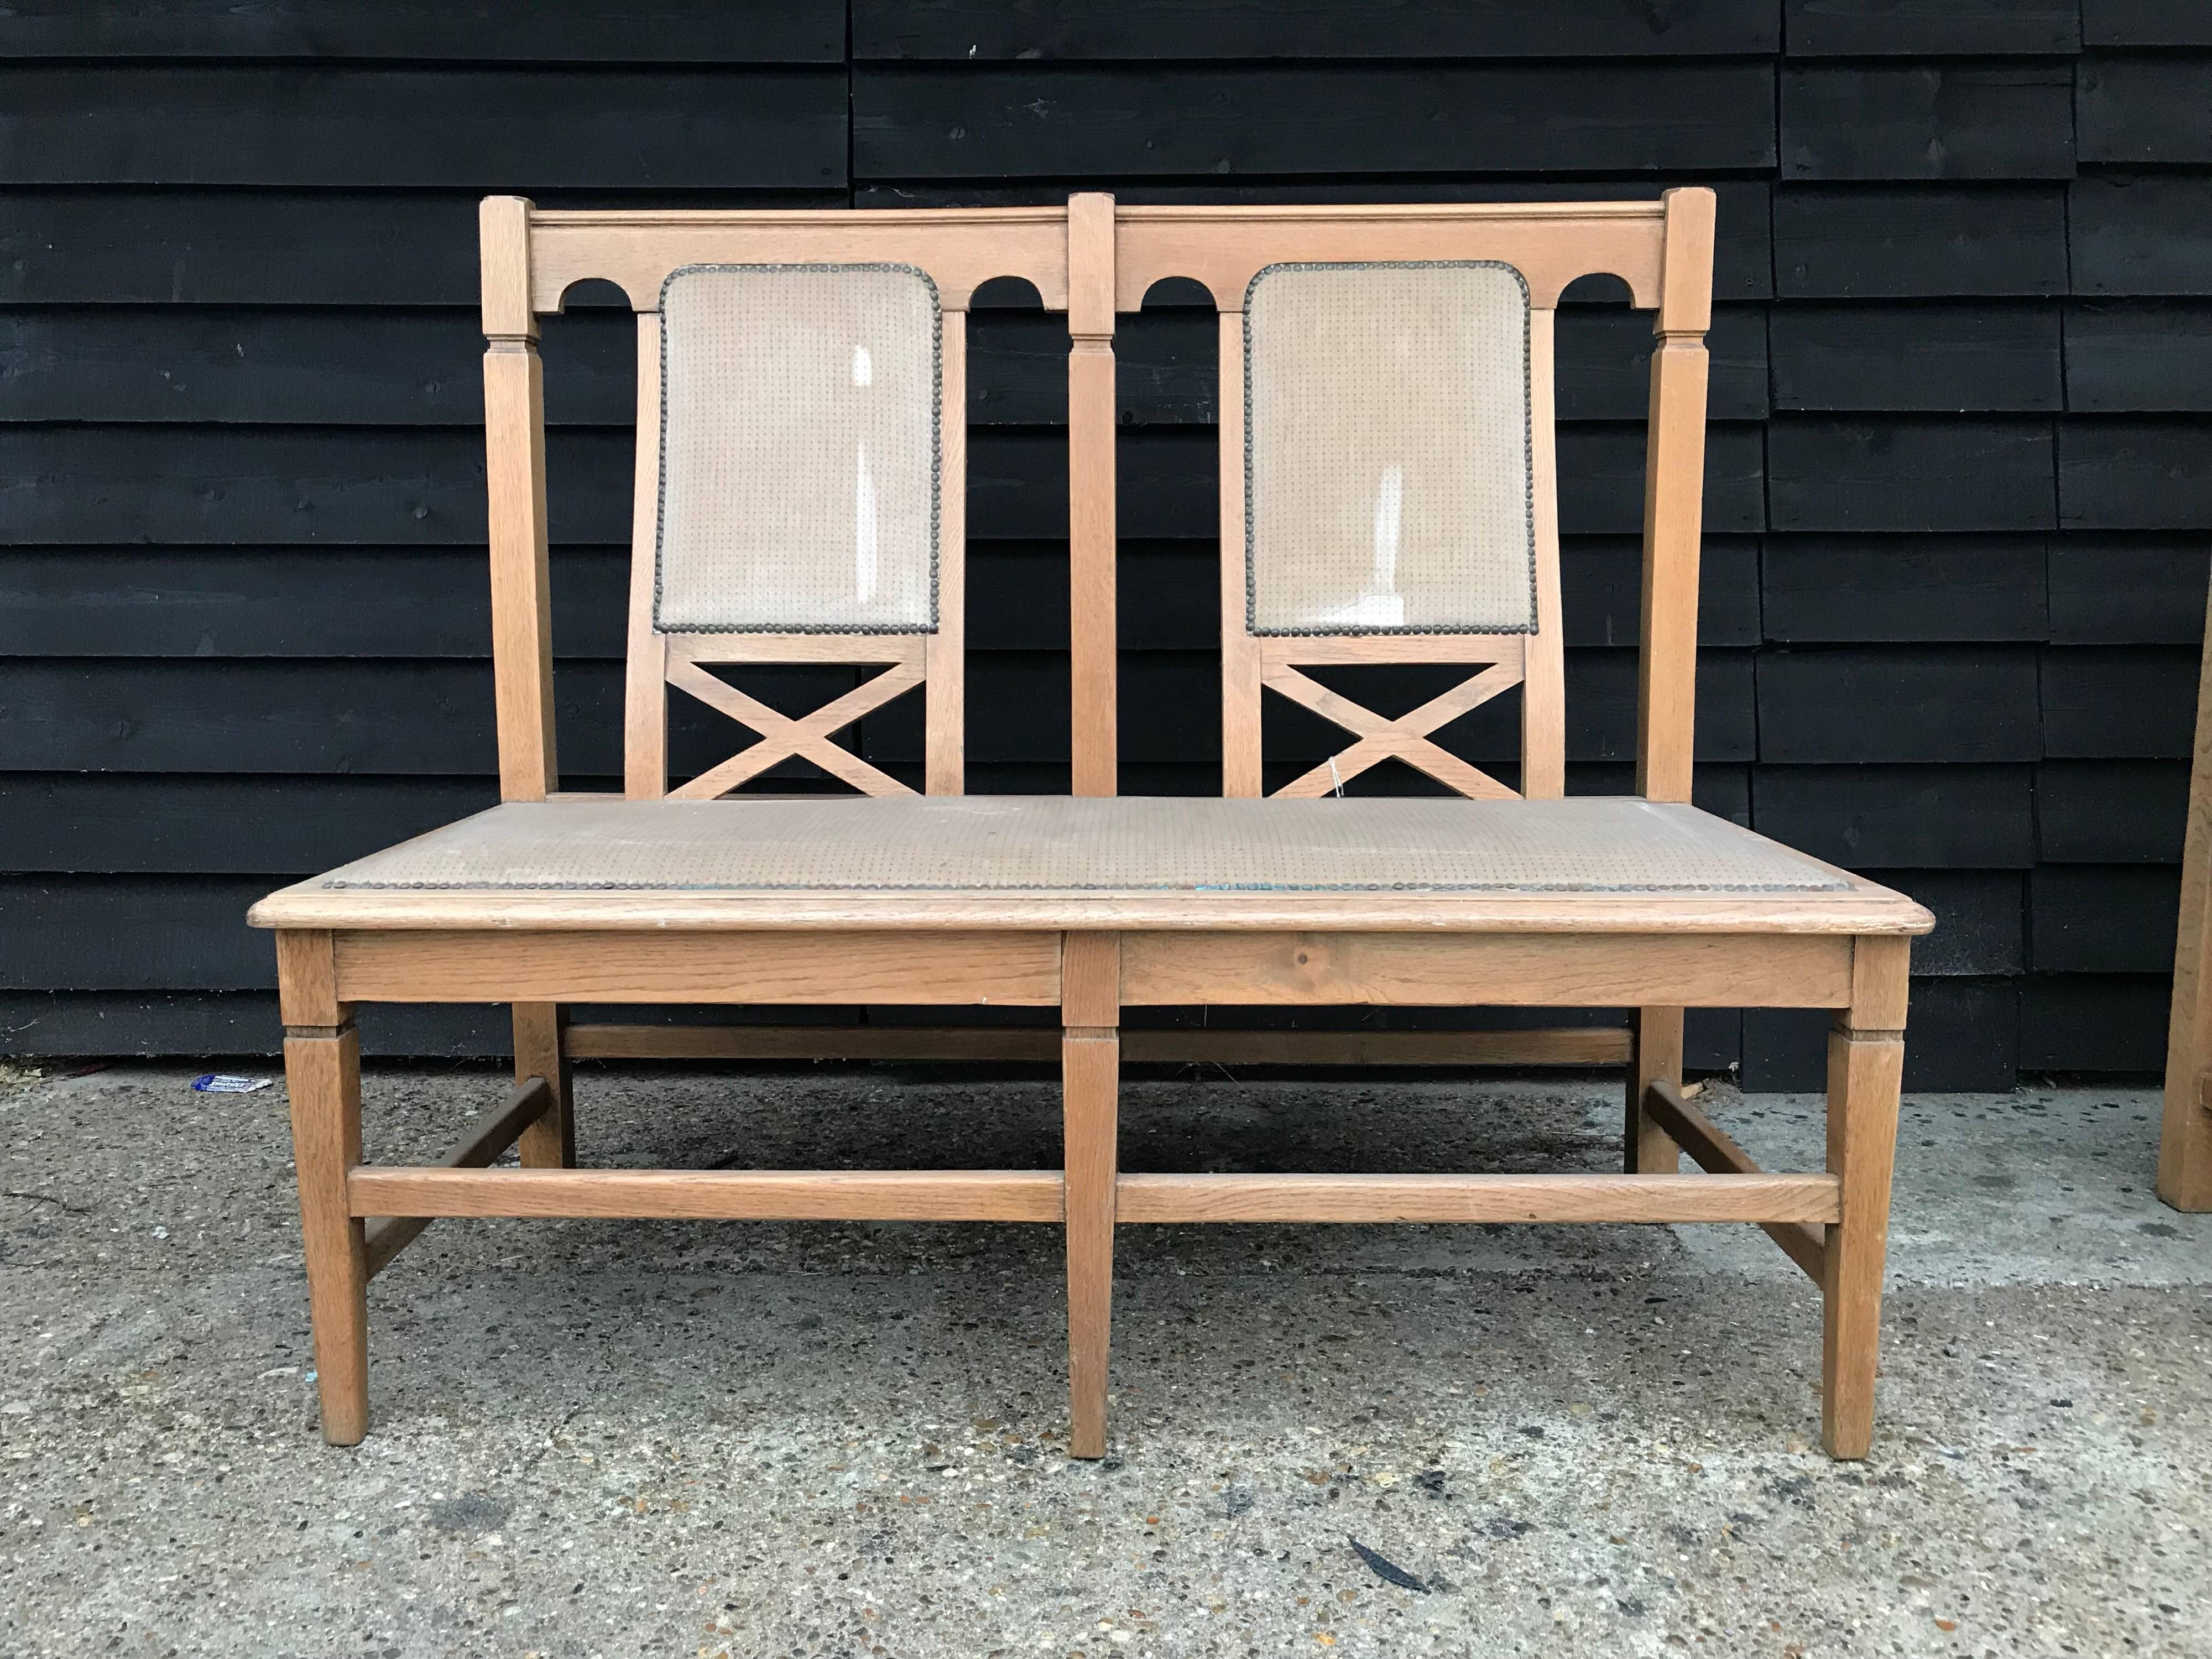 Six Arts & Crafts matching oak cafe settles, benches or loveseats with shaped backrests.
Attributed to Wylie & Lochhead.
Would also work great in a cafe, bar or your own dining or breakfast room.
Six matching, but with subtle design differences